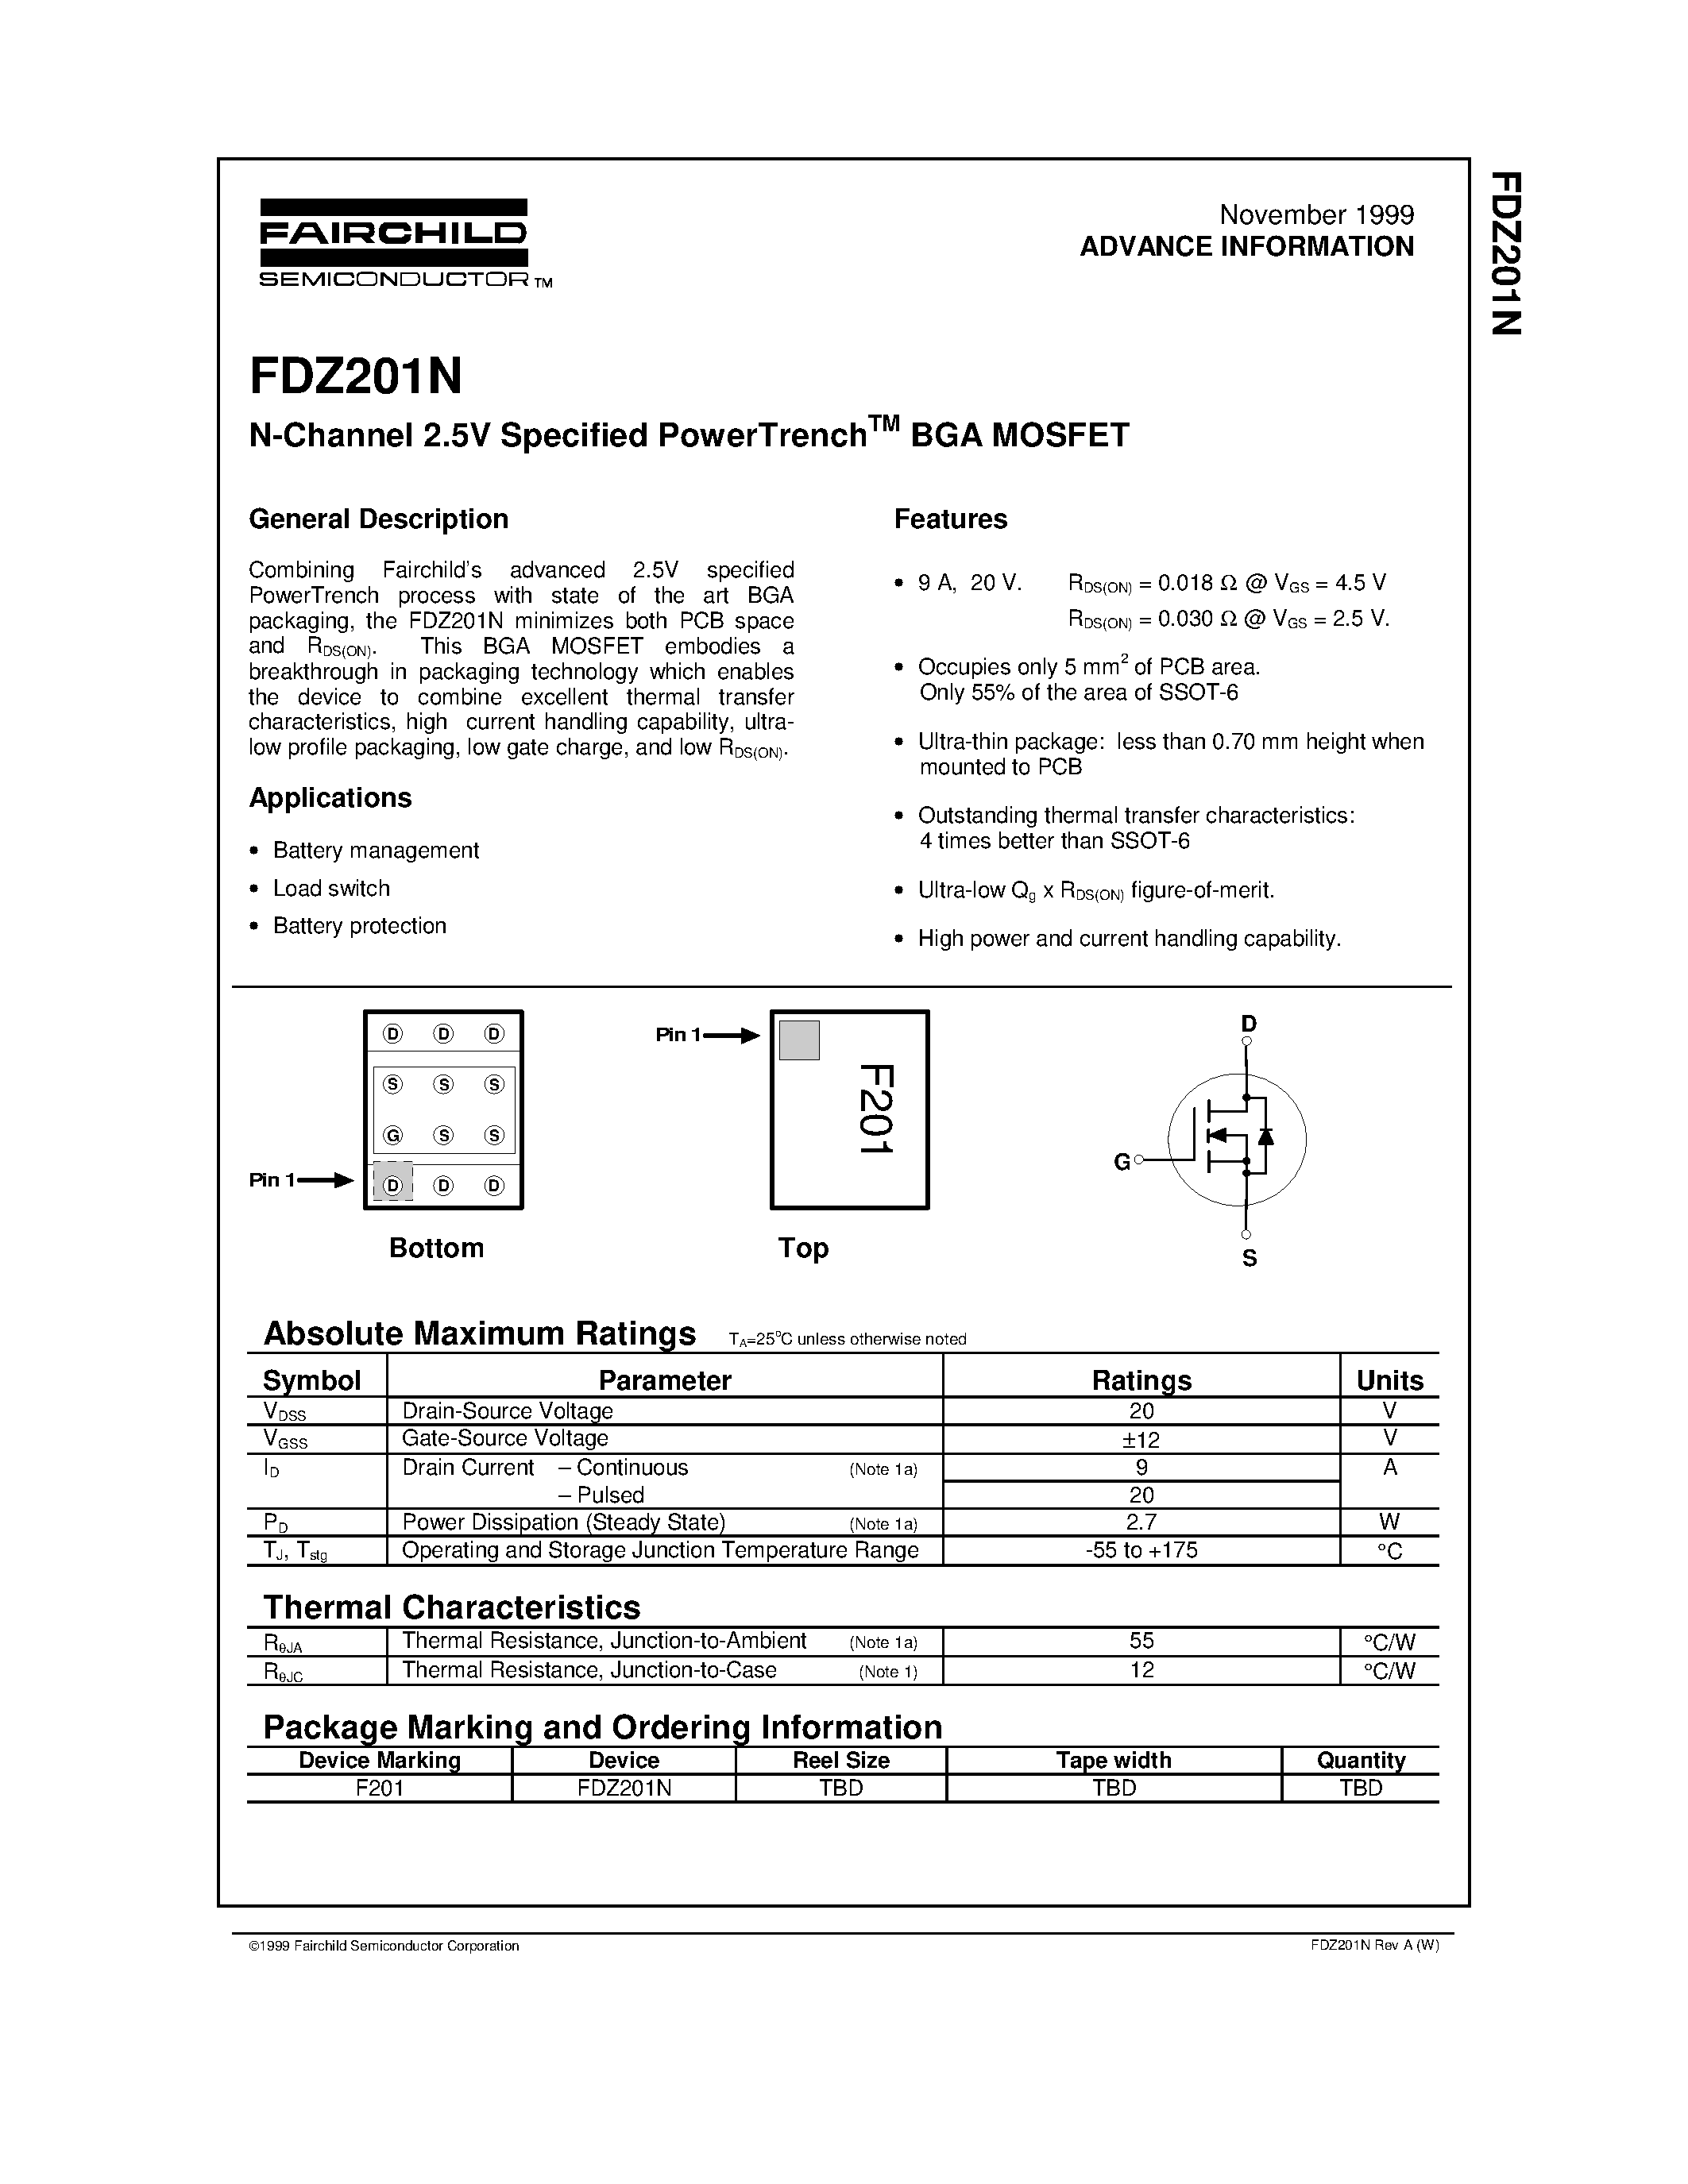 Даташит FDZ201N - N-Channel 2.5V Specified PowerTrenchTM BGA MOSFET страница 1